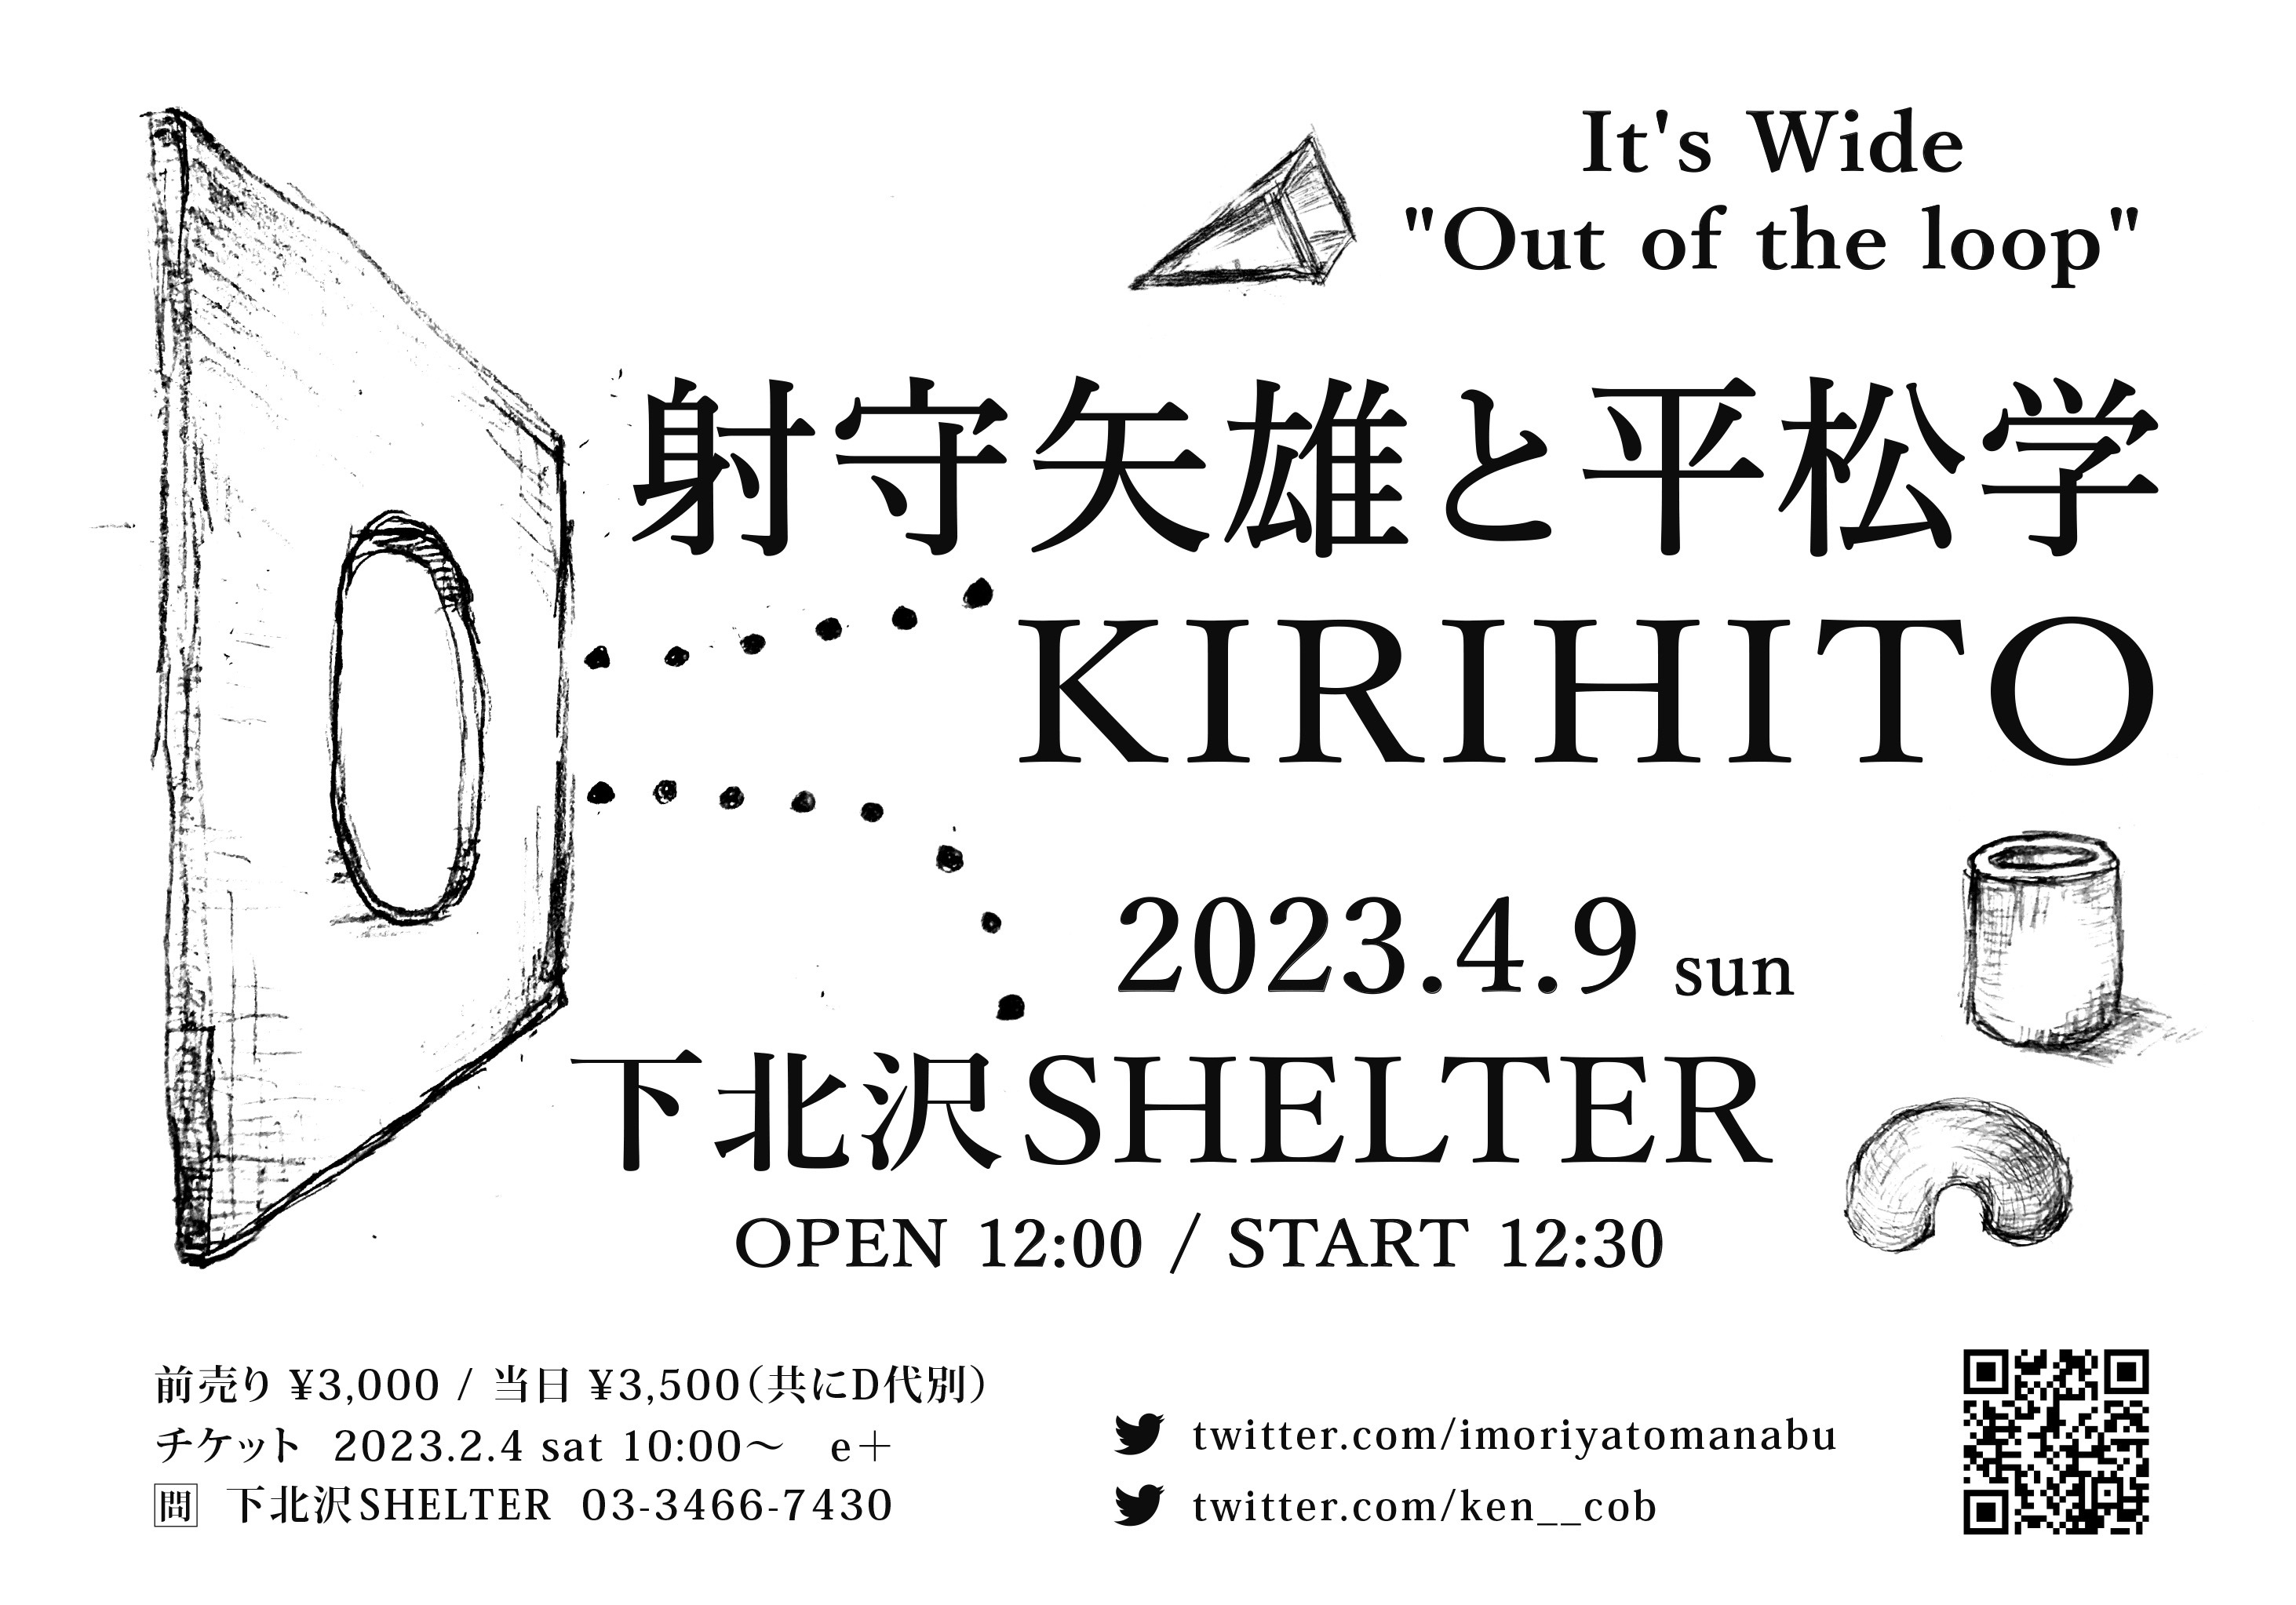 『It's Wide “Out of the loop”』